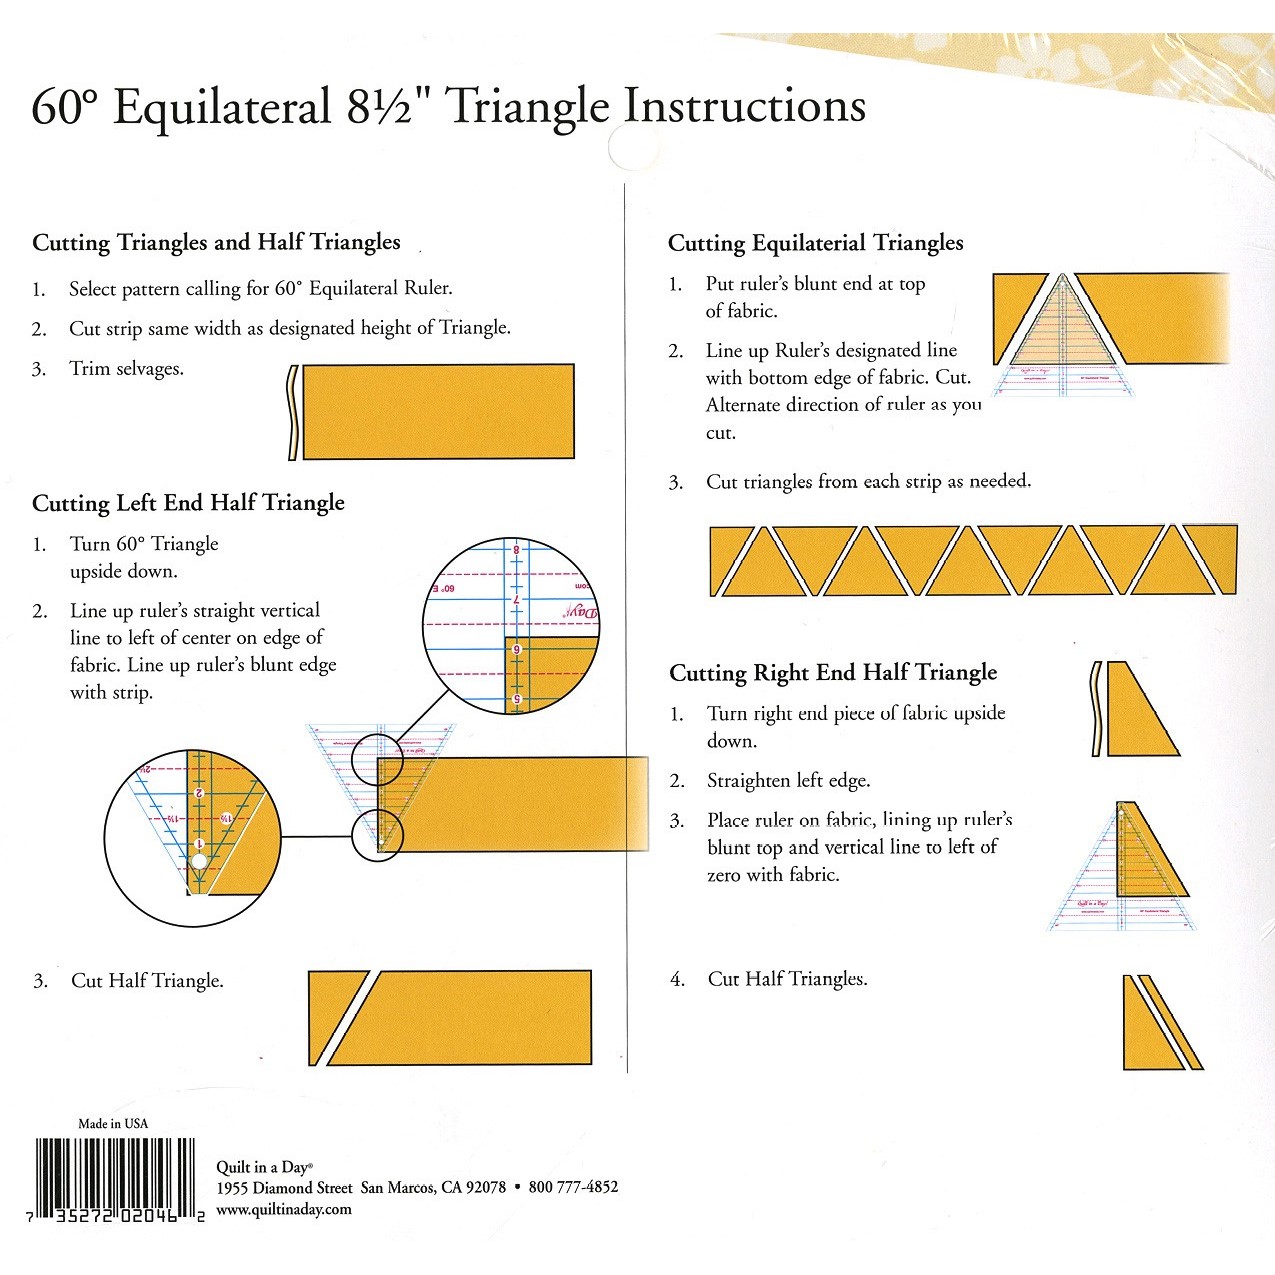 Quilter's Equilateral Triangle Ruler 6 Inches, 60 Degrees